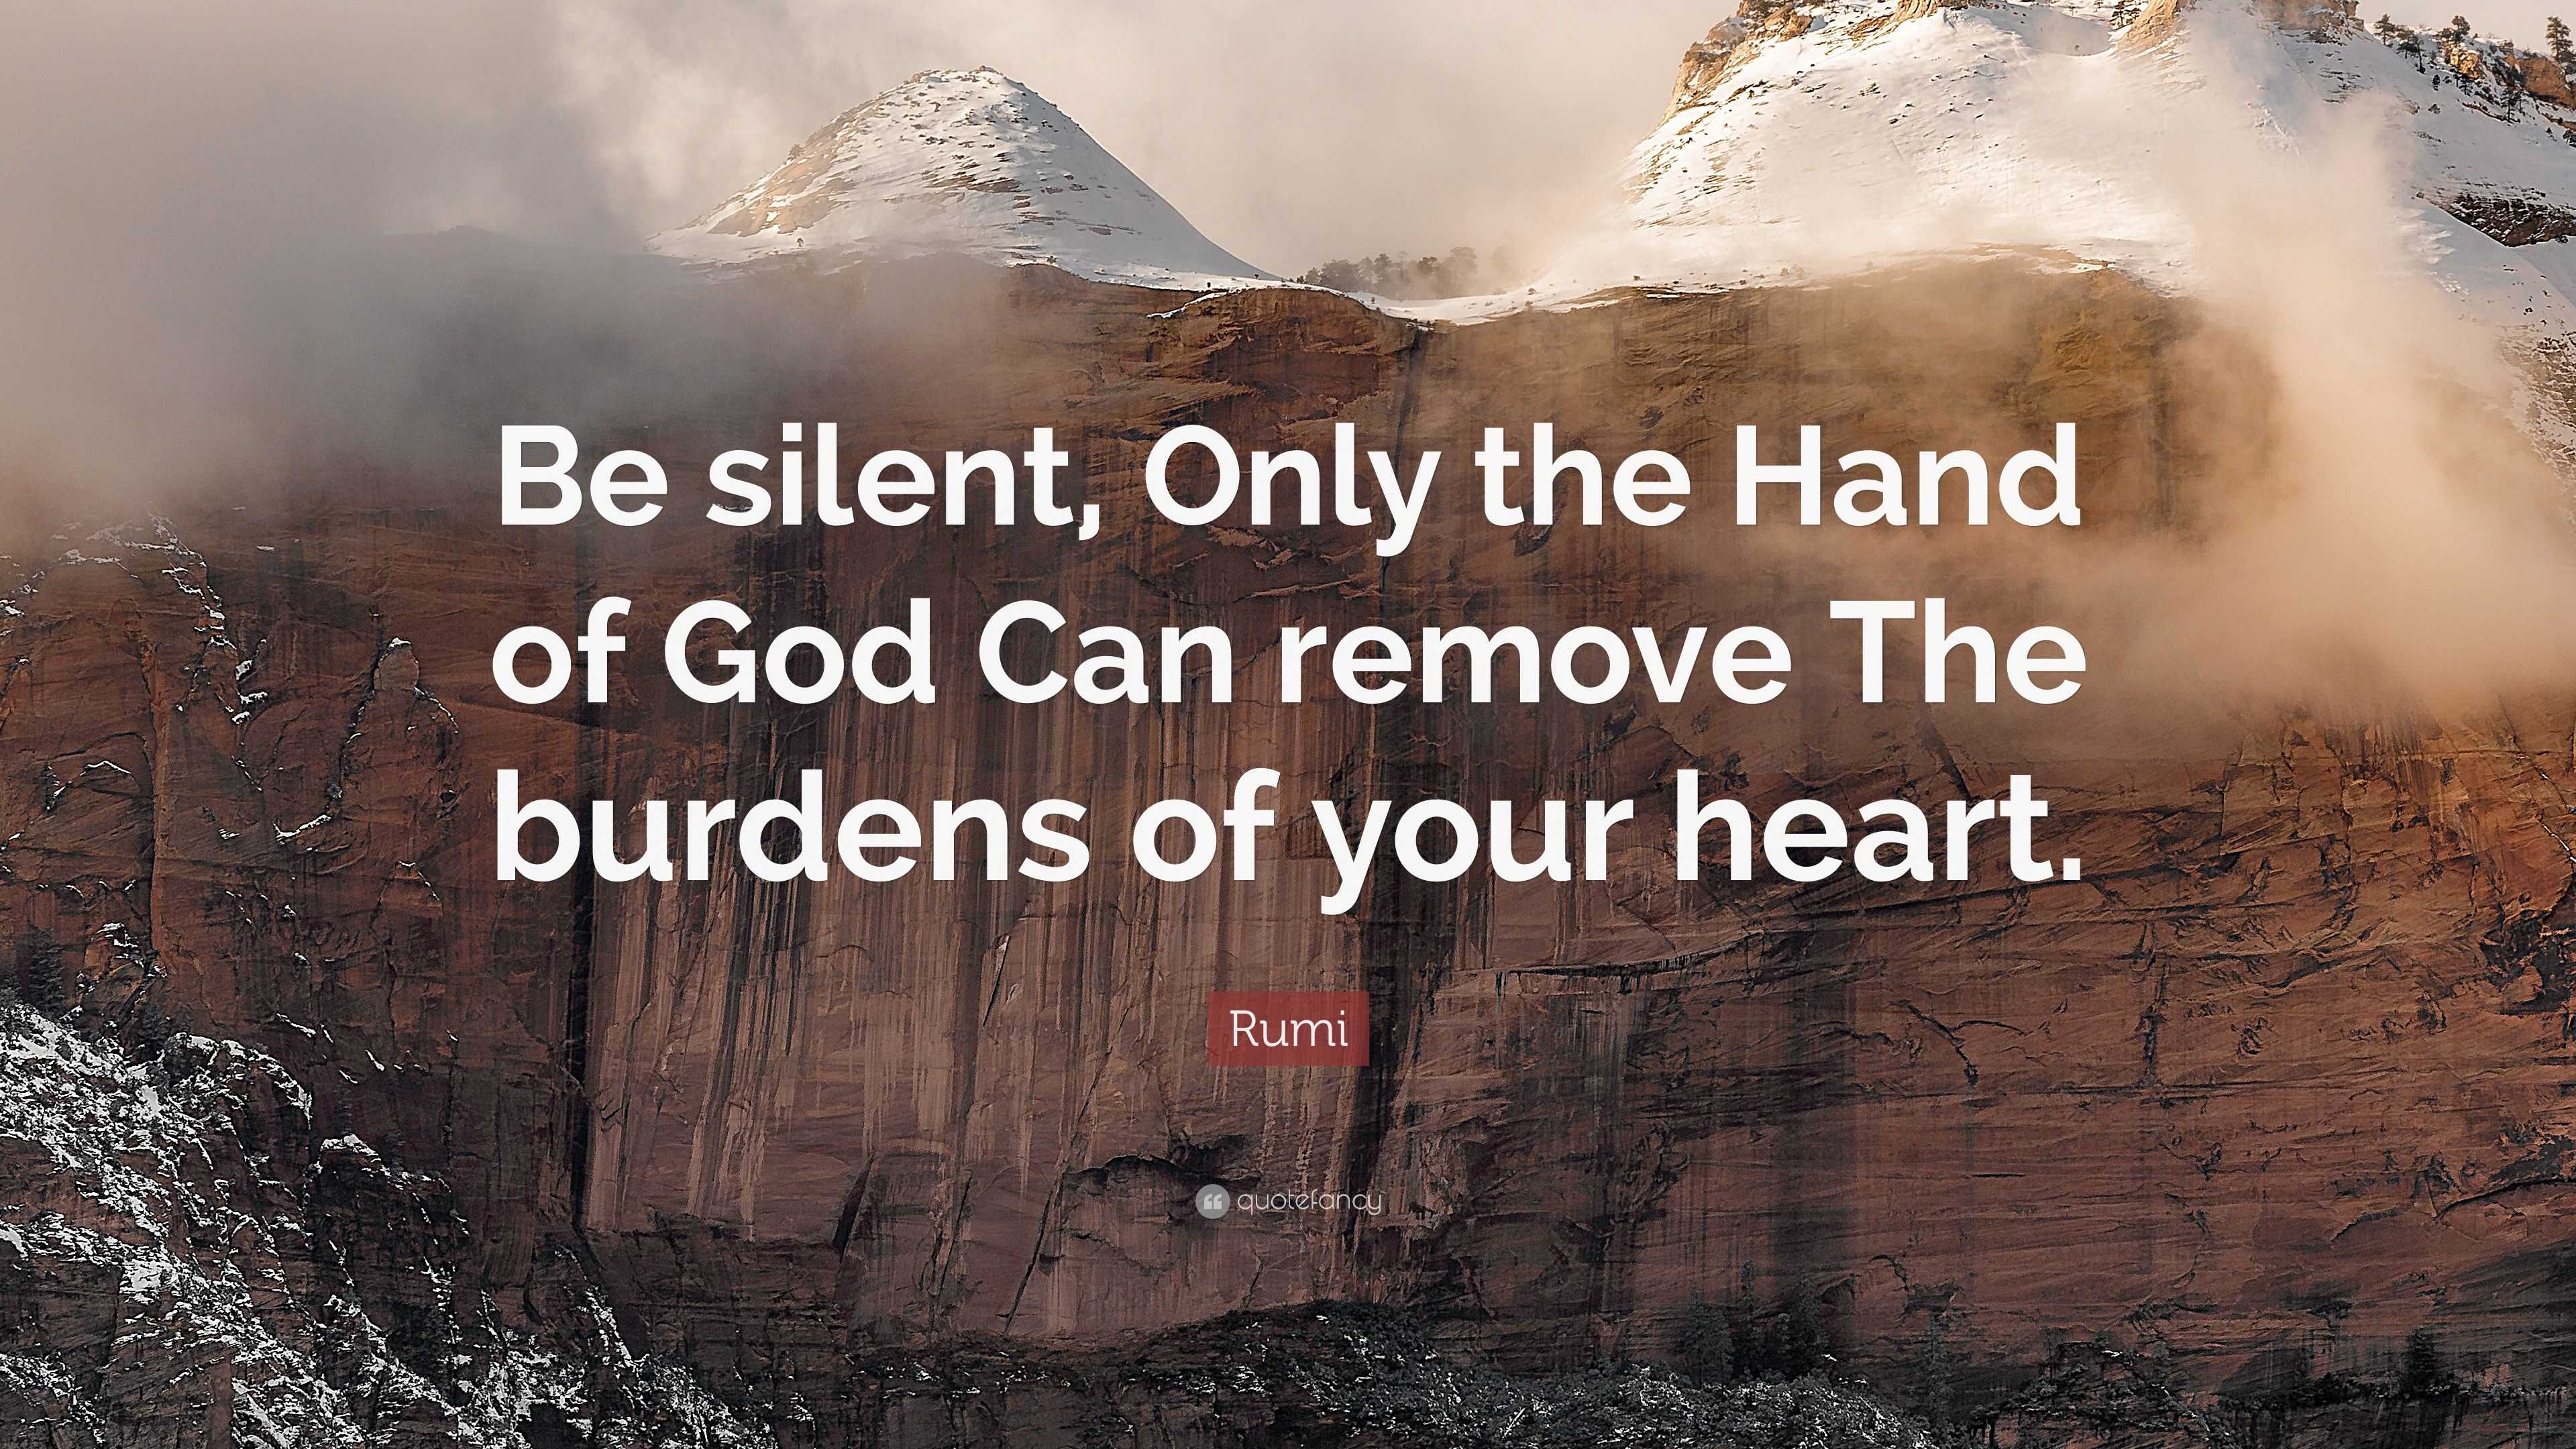 Rumi Quote: “Be silent, Only the Hand of God Can remove The burdens of ...